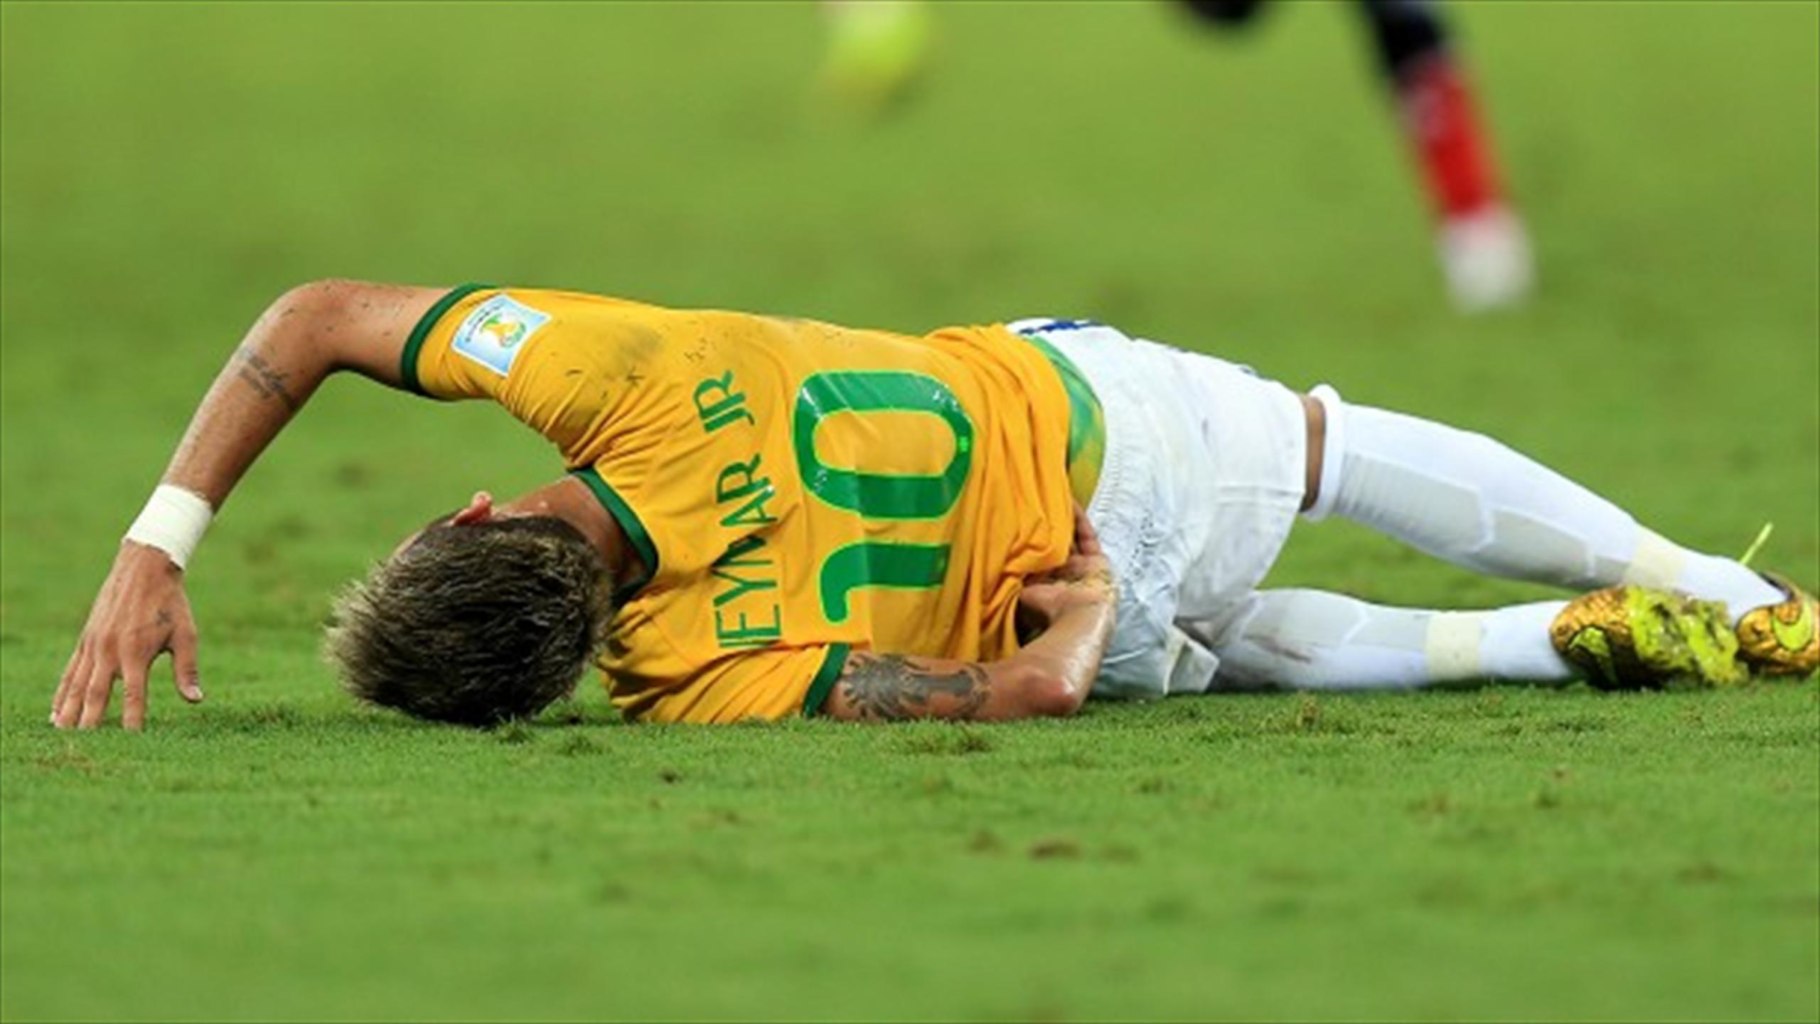 Neymar could have been in a wheelchair after his injury where he got with a knee on his back